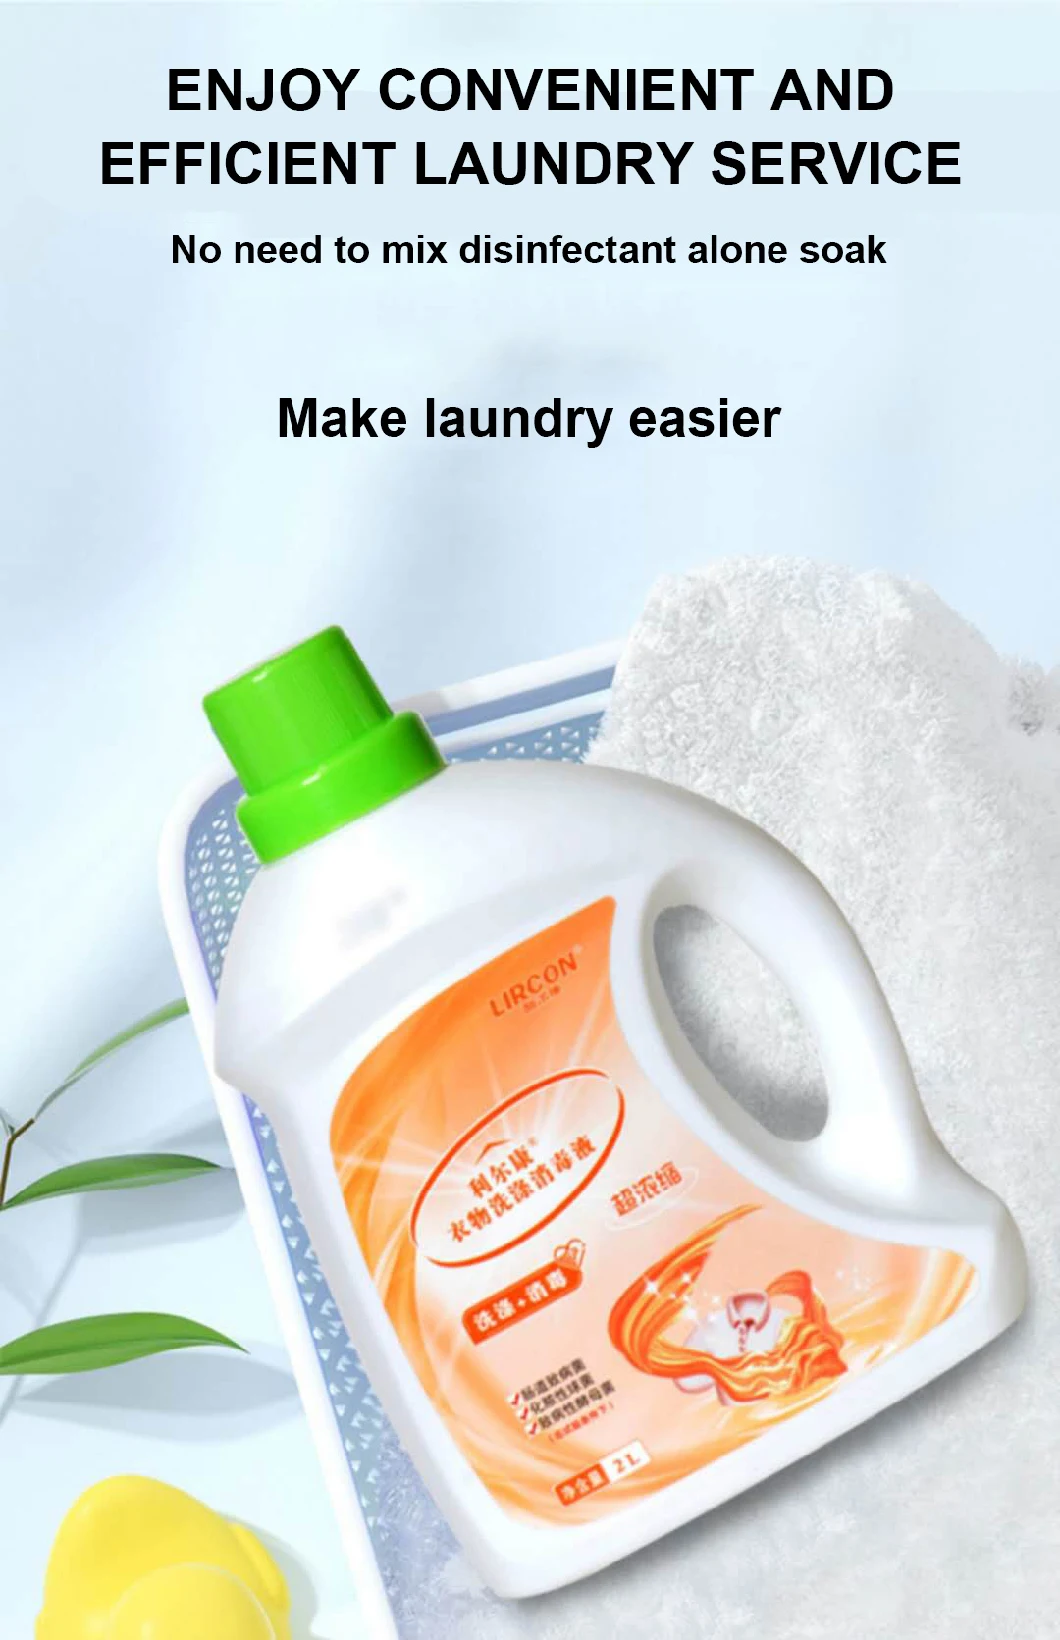 Made in China 2L Liquid Laundry Detergent Different Fragrance Liquid Laundry Detergent Disinfectant for Fabric Softener